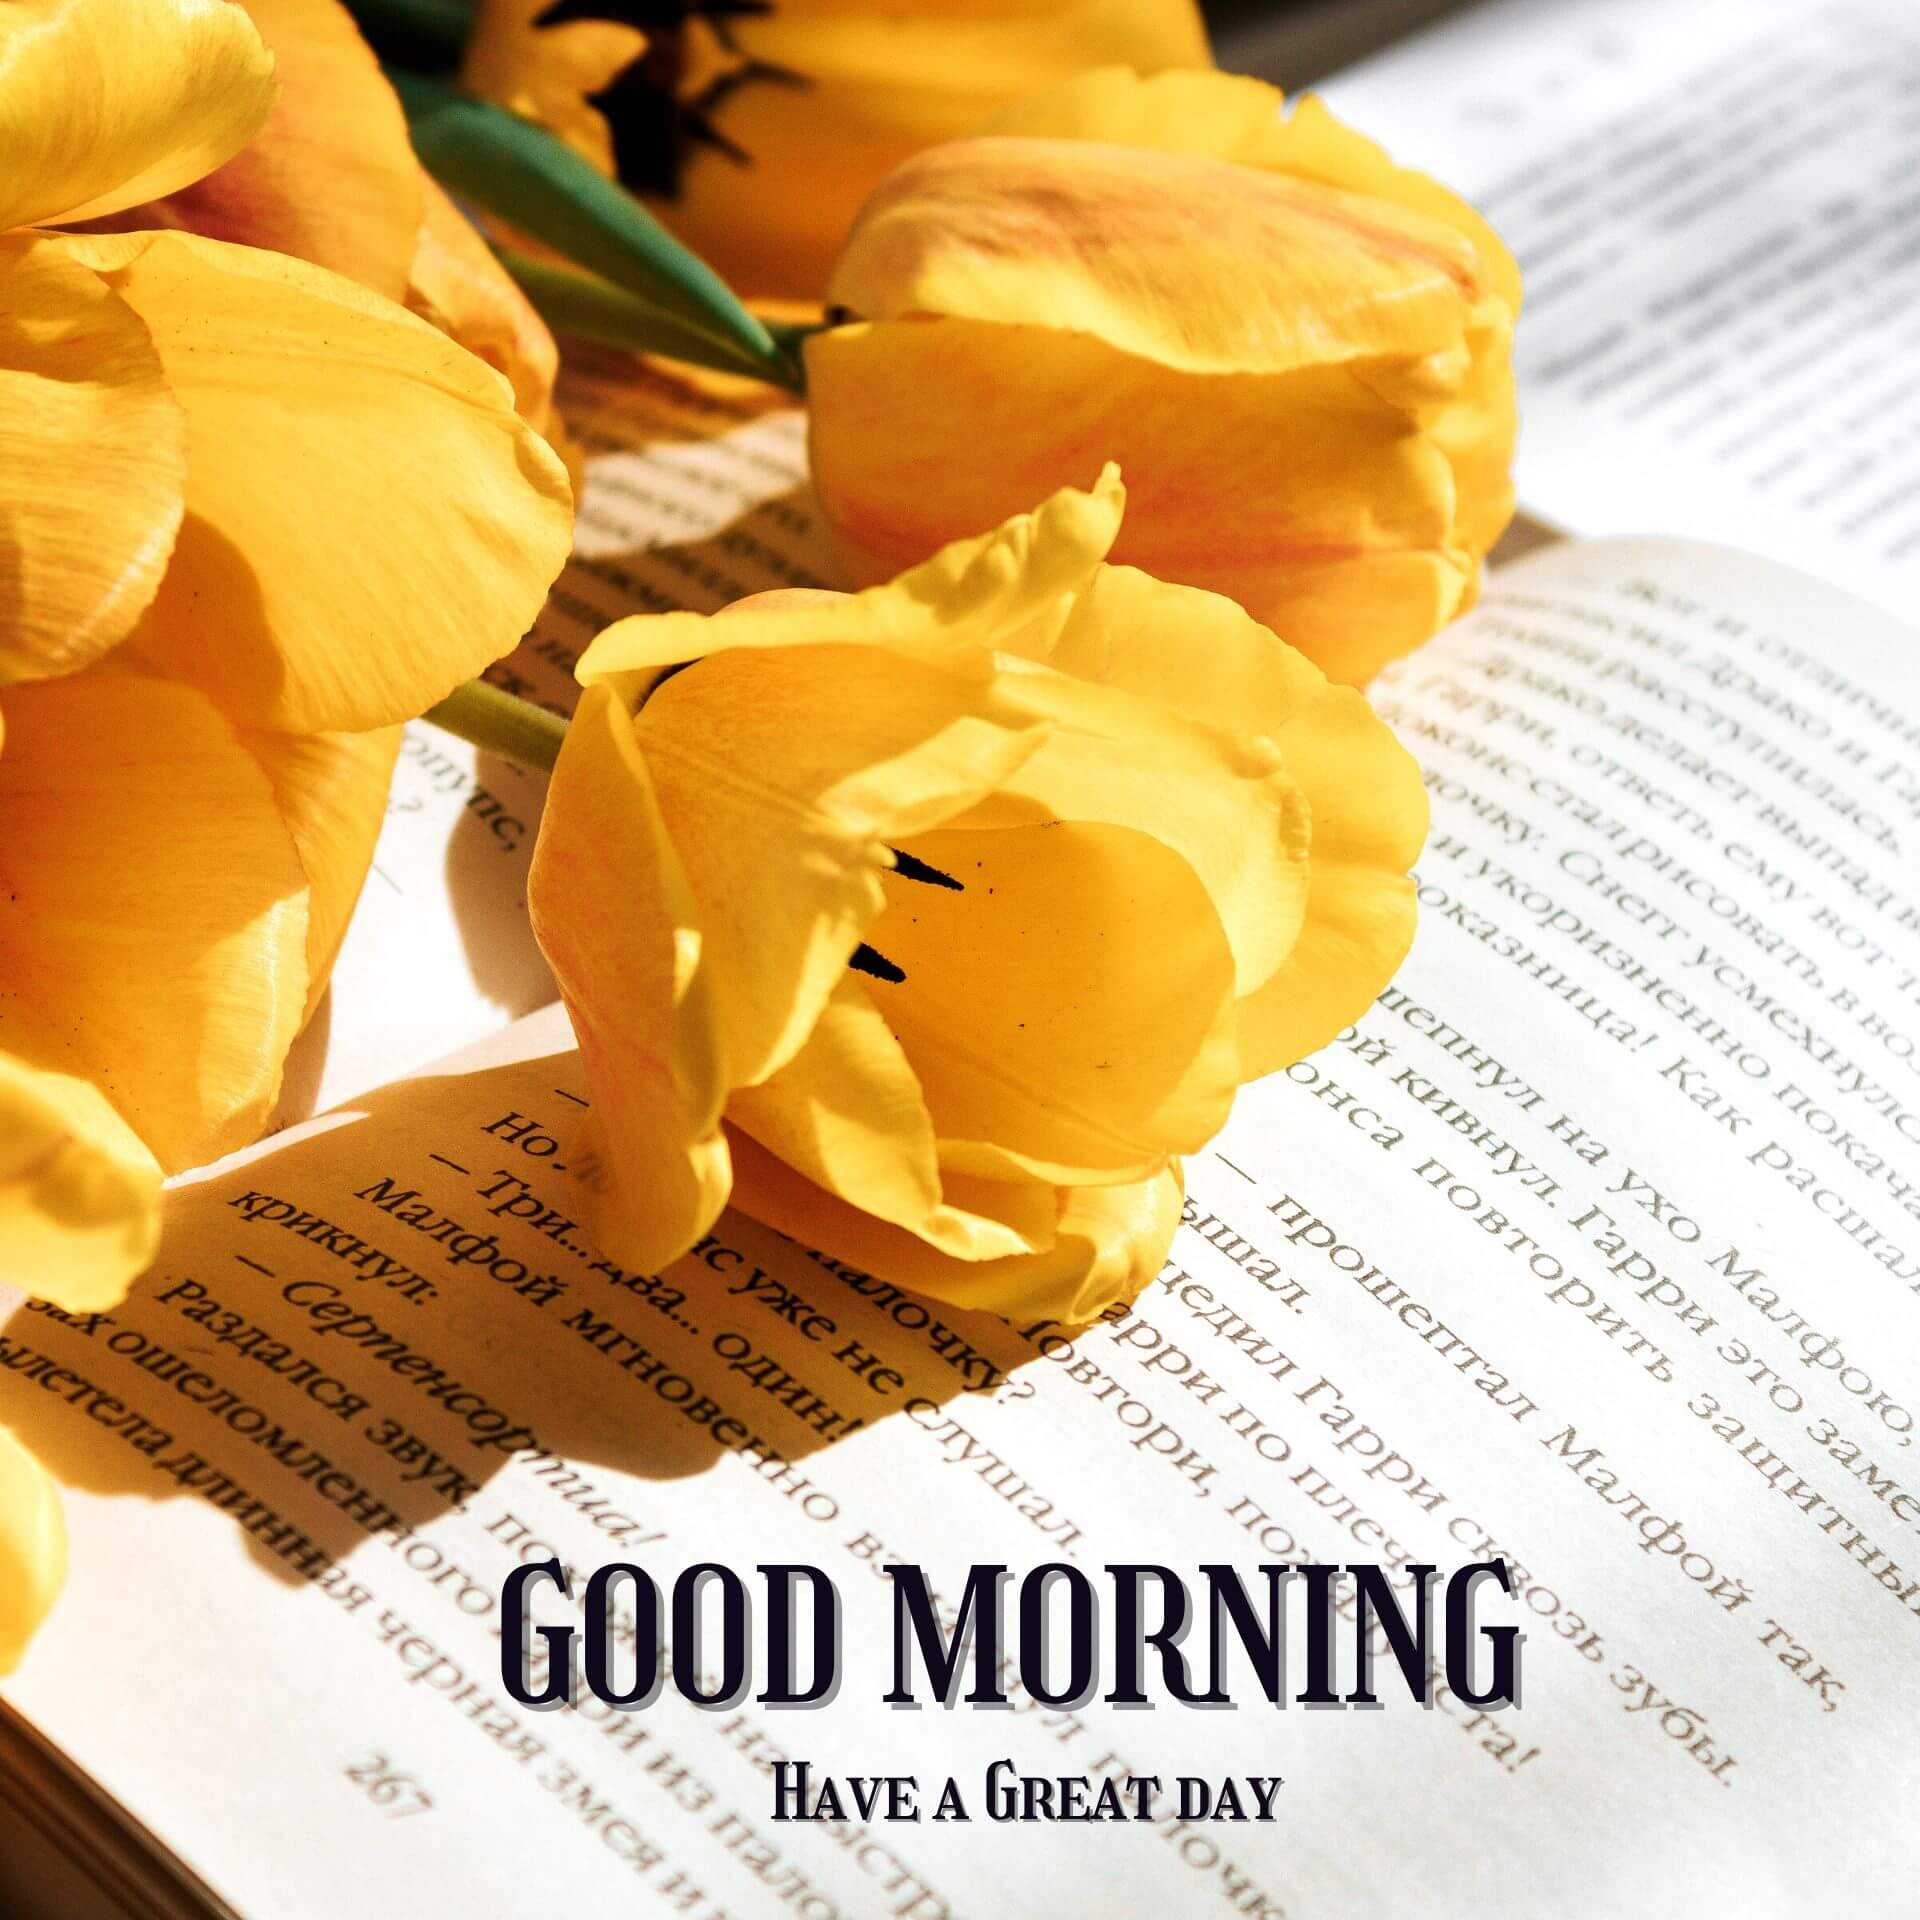 Good morning have a nice day Wallpaper With Yellow Flower